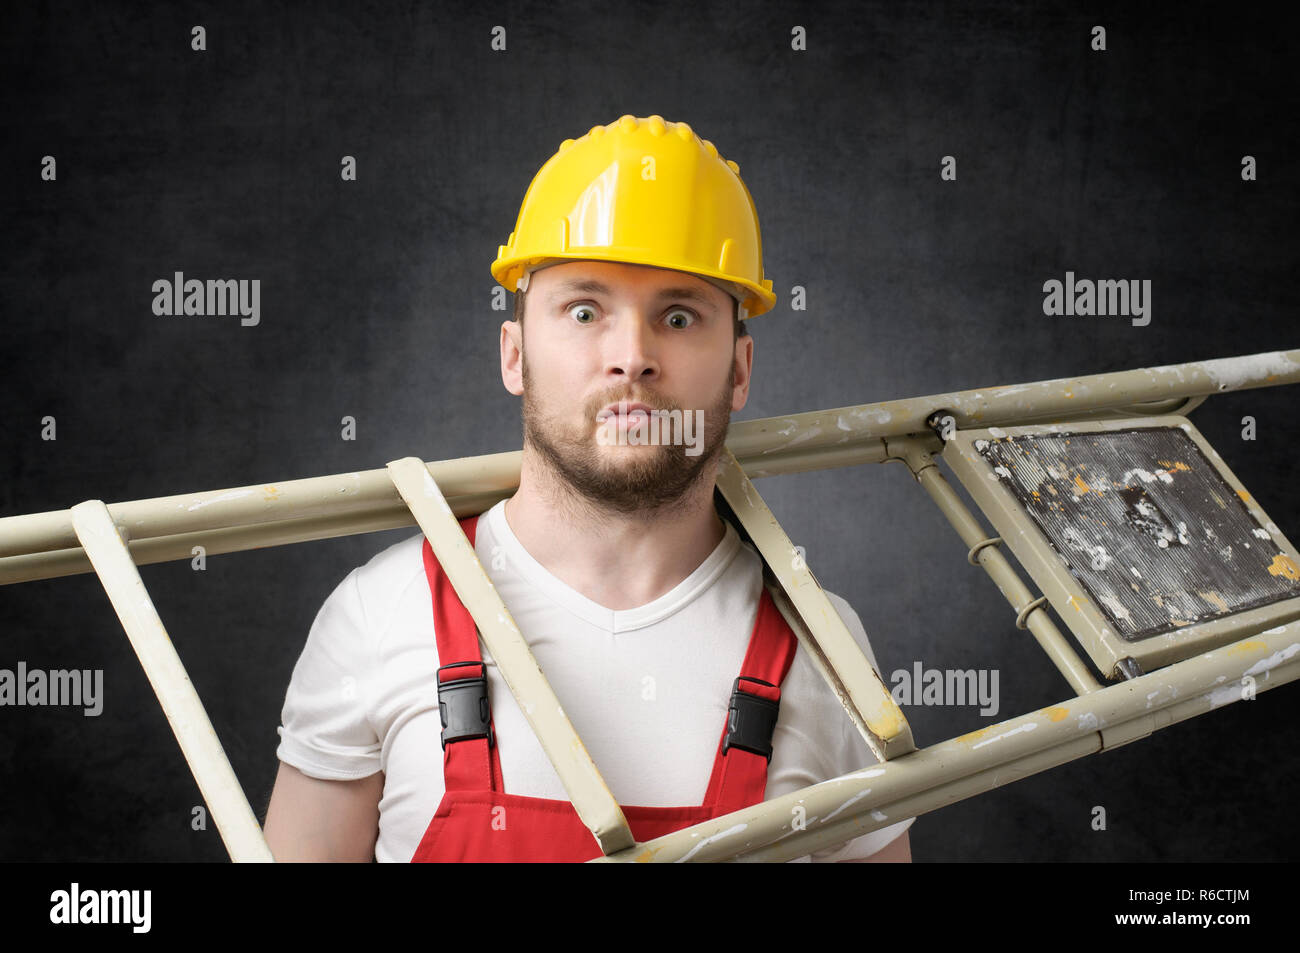 Clumsy worker with ladder Stock Photo